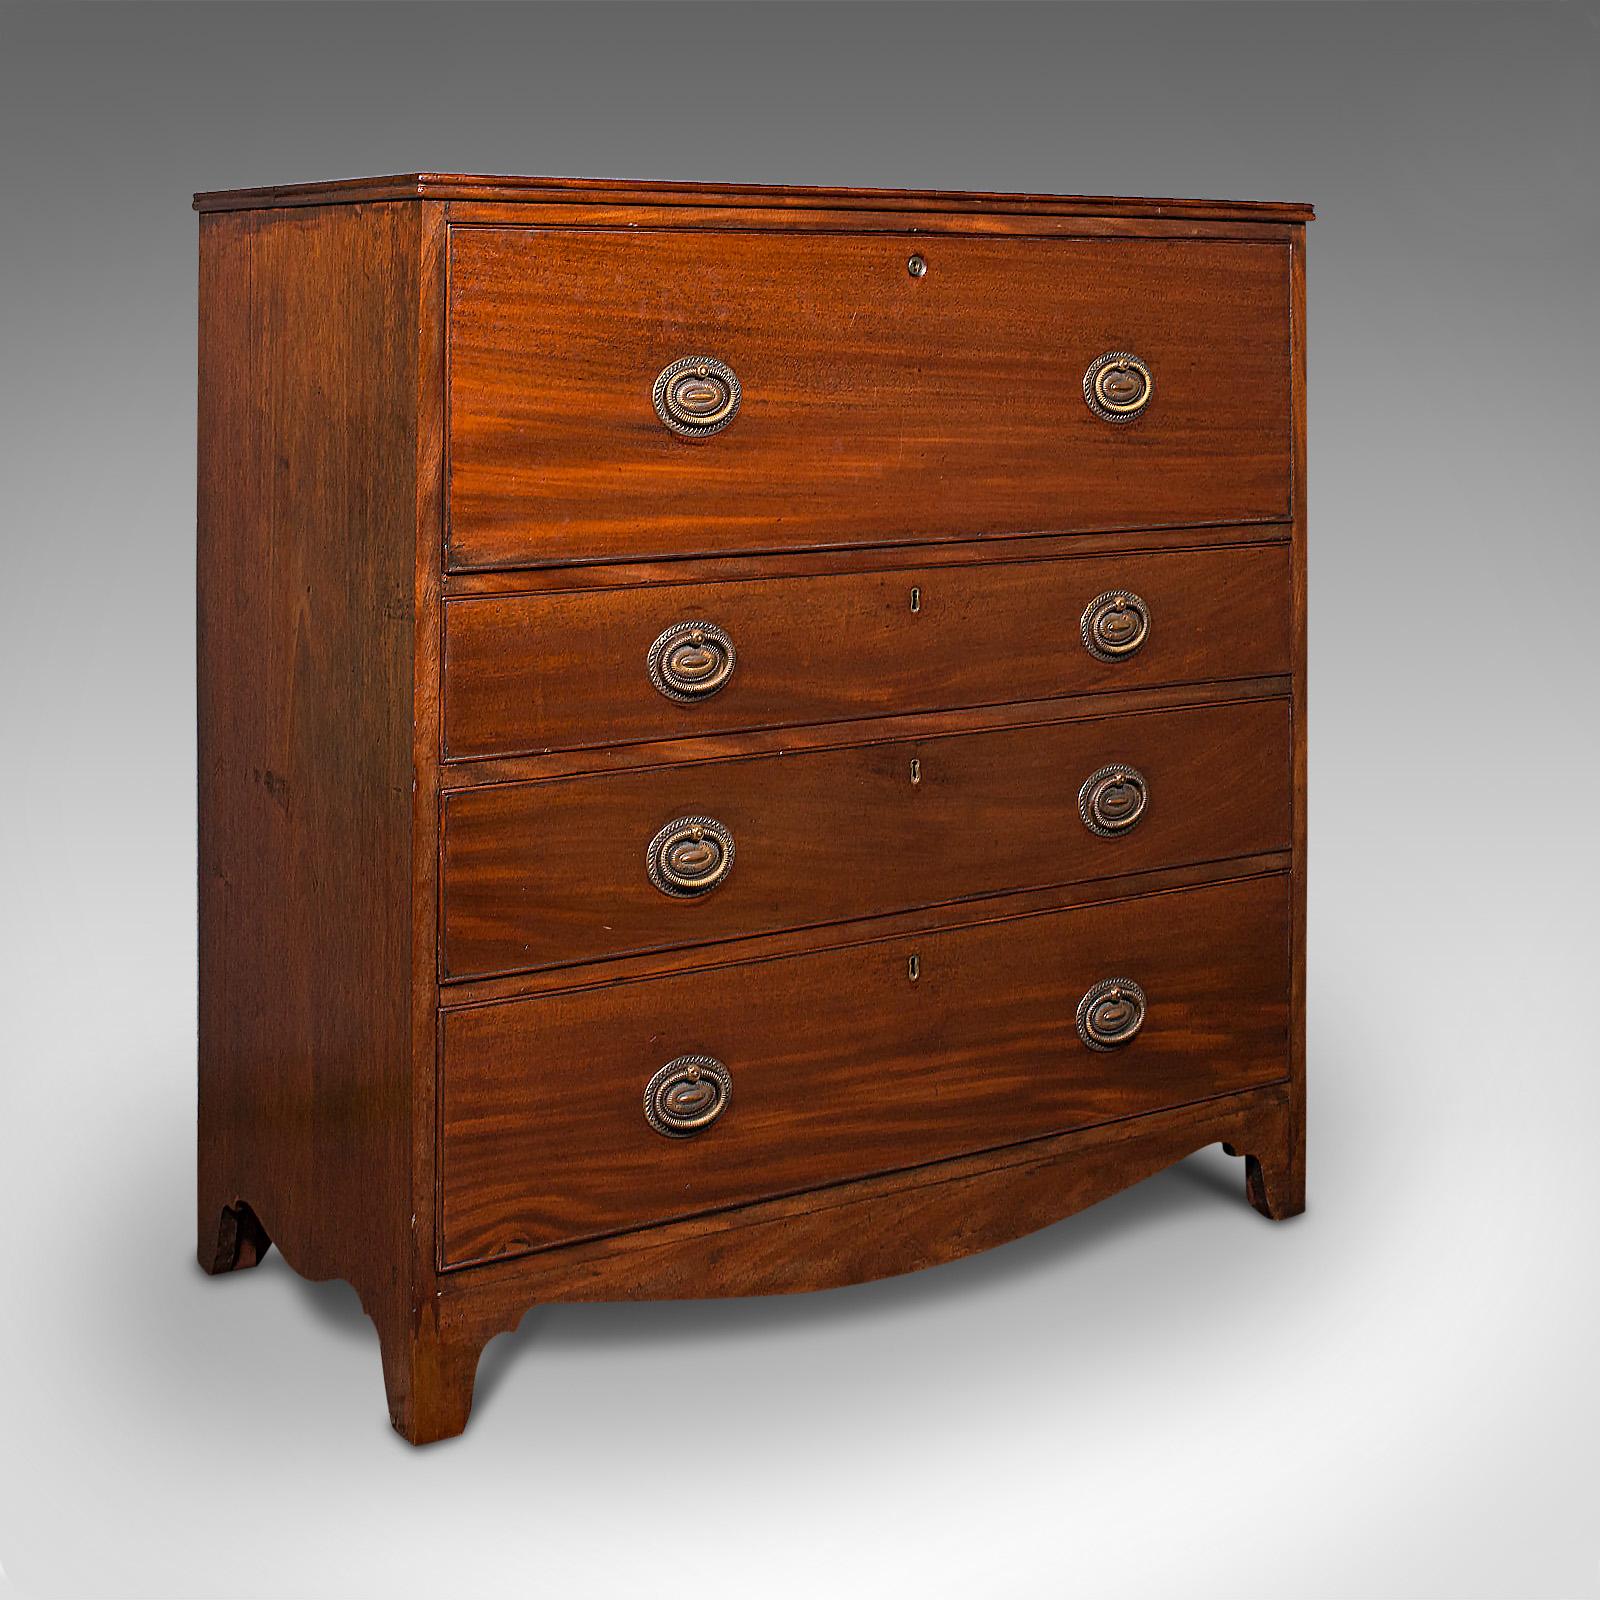 This is an antique secretaire cabinet. An English, mahogany chest of drawers with drop front writing desk, dating to the Georgian period, circa 1800.

Gracefully concealed writing desk fit for a gentleman's bedroom, writer's study or morning